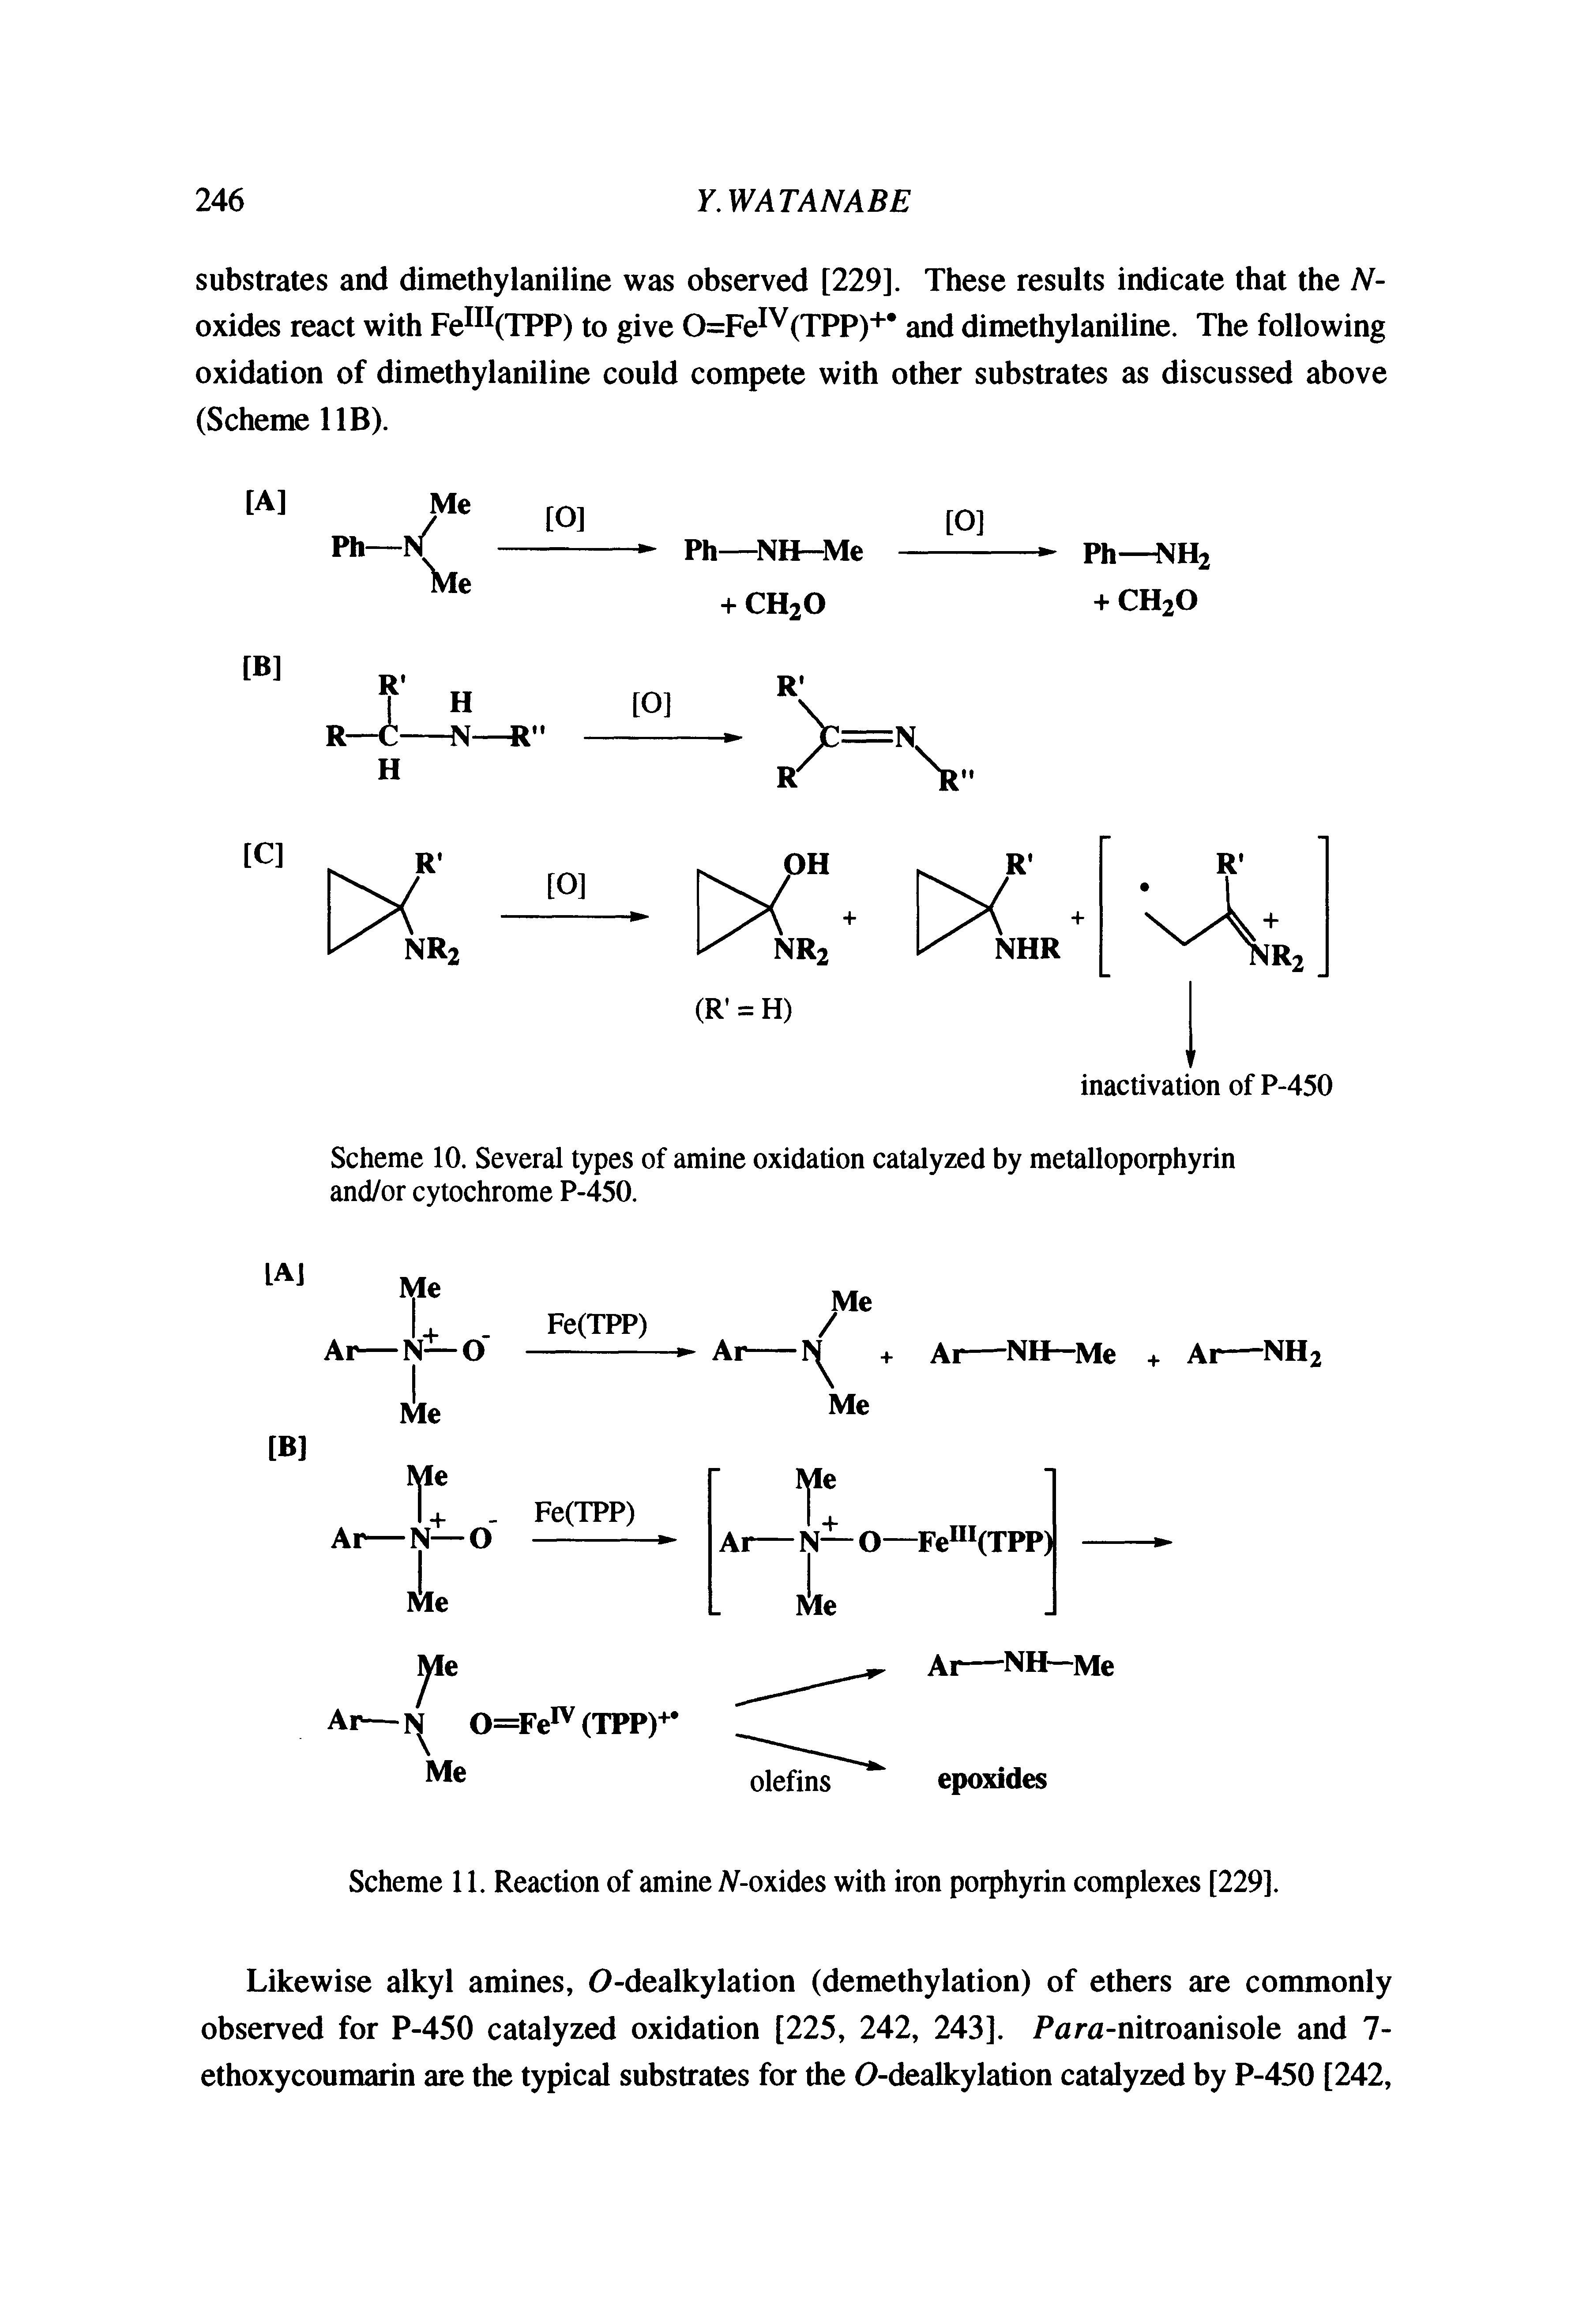 Scheme 11. Reaction of amine N-oxides with iron porphyrin complexes [229].